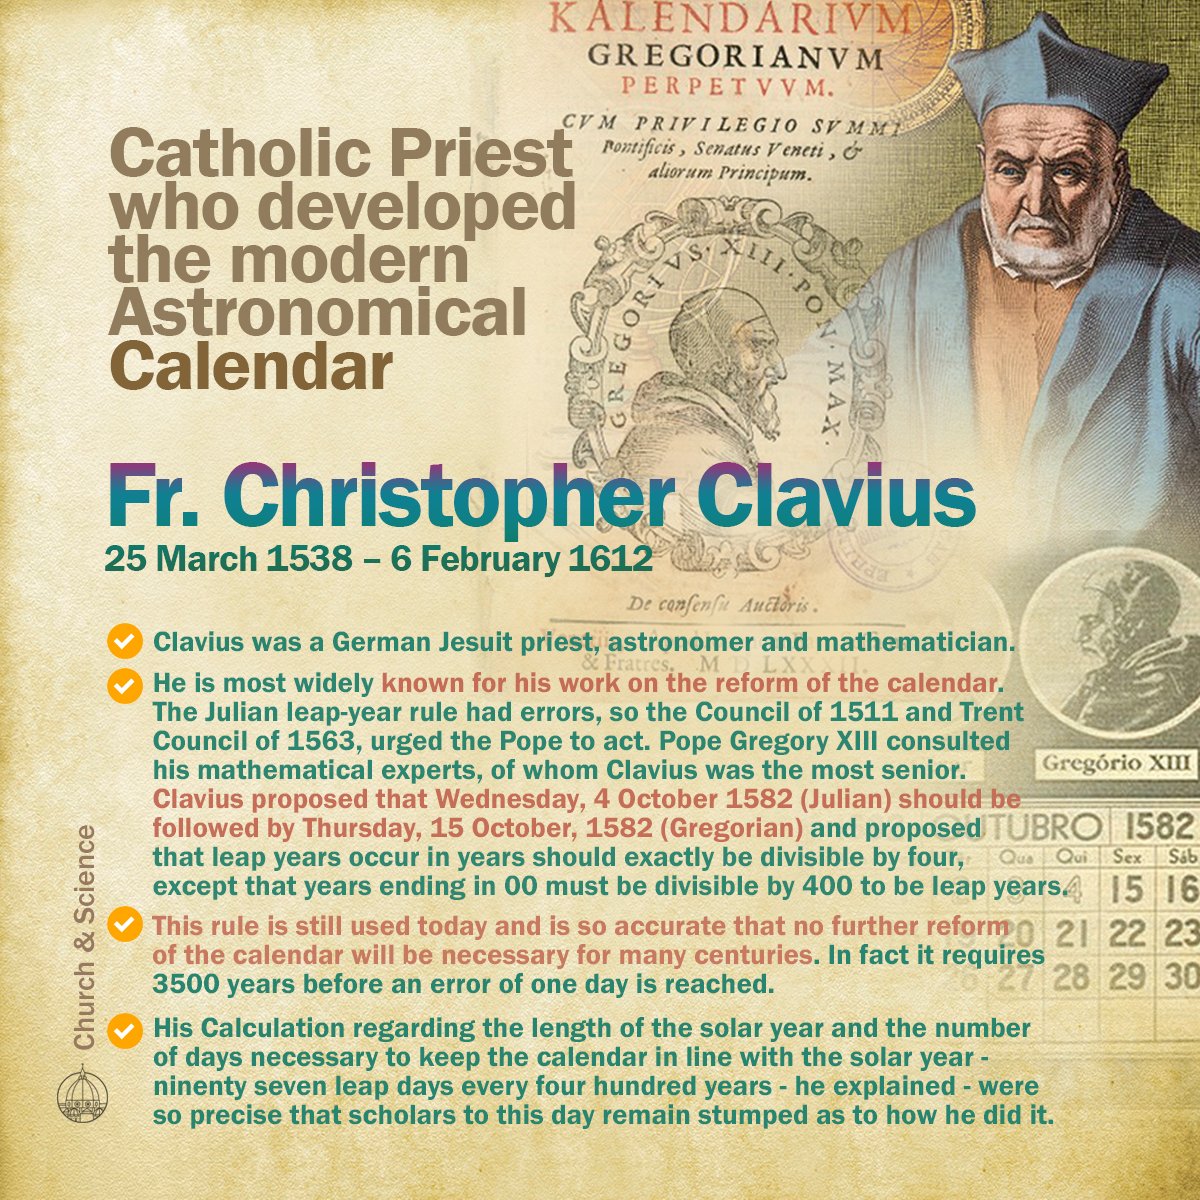 Catholic Priest who developed the modern Astronomical Calendar - Fr. Christopher Clavius (1538–1612). He fixed the Julian leap year rule and propsed that Wednesday, 4 October 1582 (Julian) should be followed by Thursday, 15 October, 1582 (Gregorian). #churchandscience #calendar